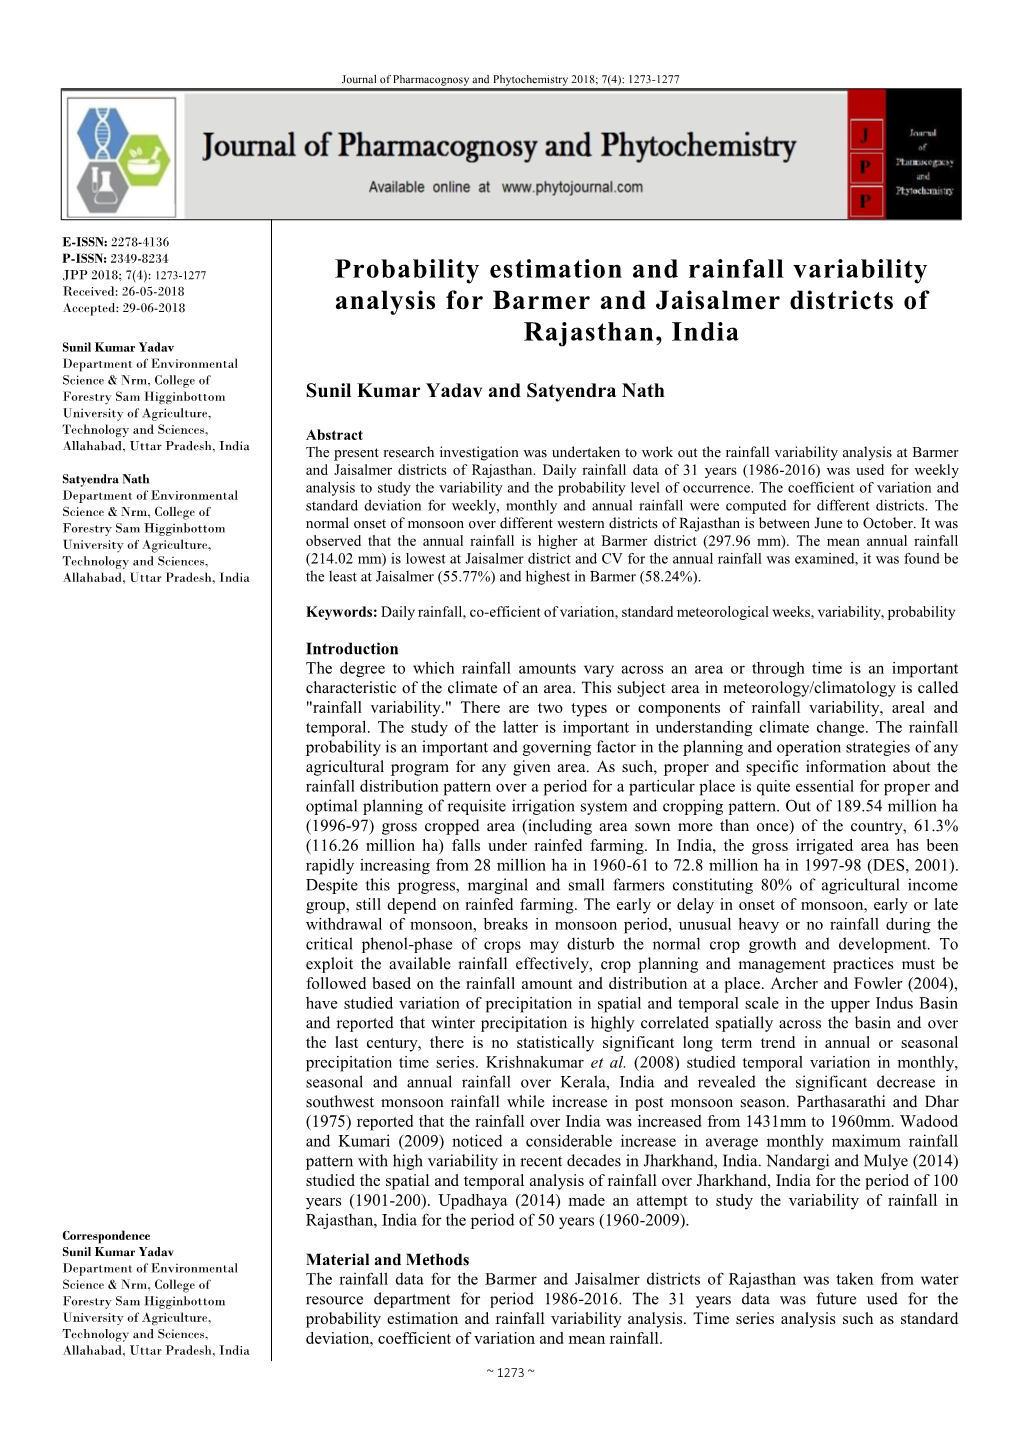 Probability Estimation and Rainfall Variability Analysis for Barmer And